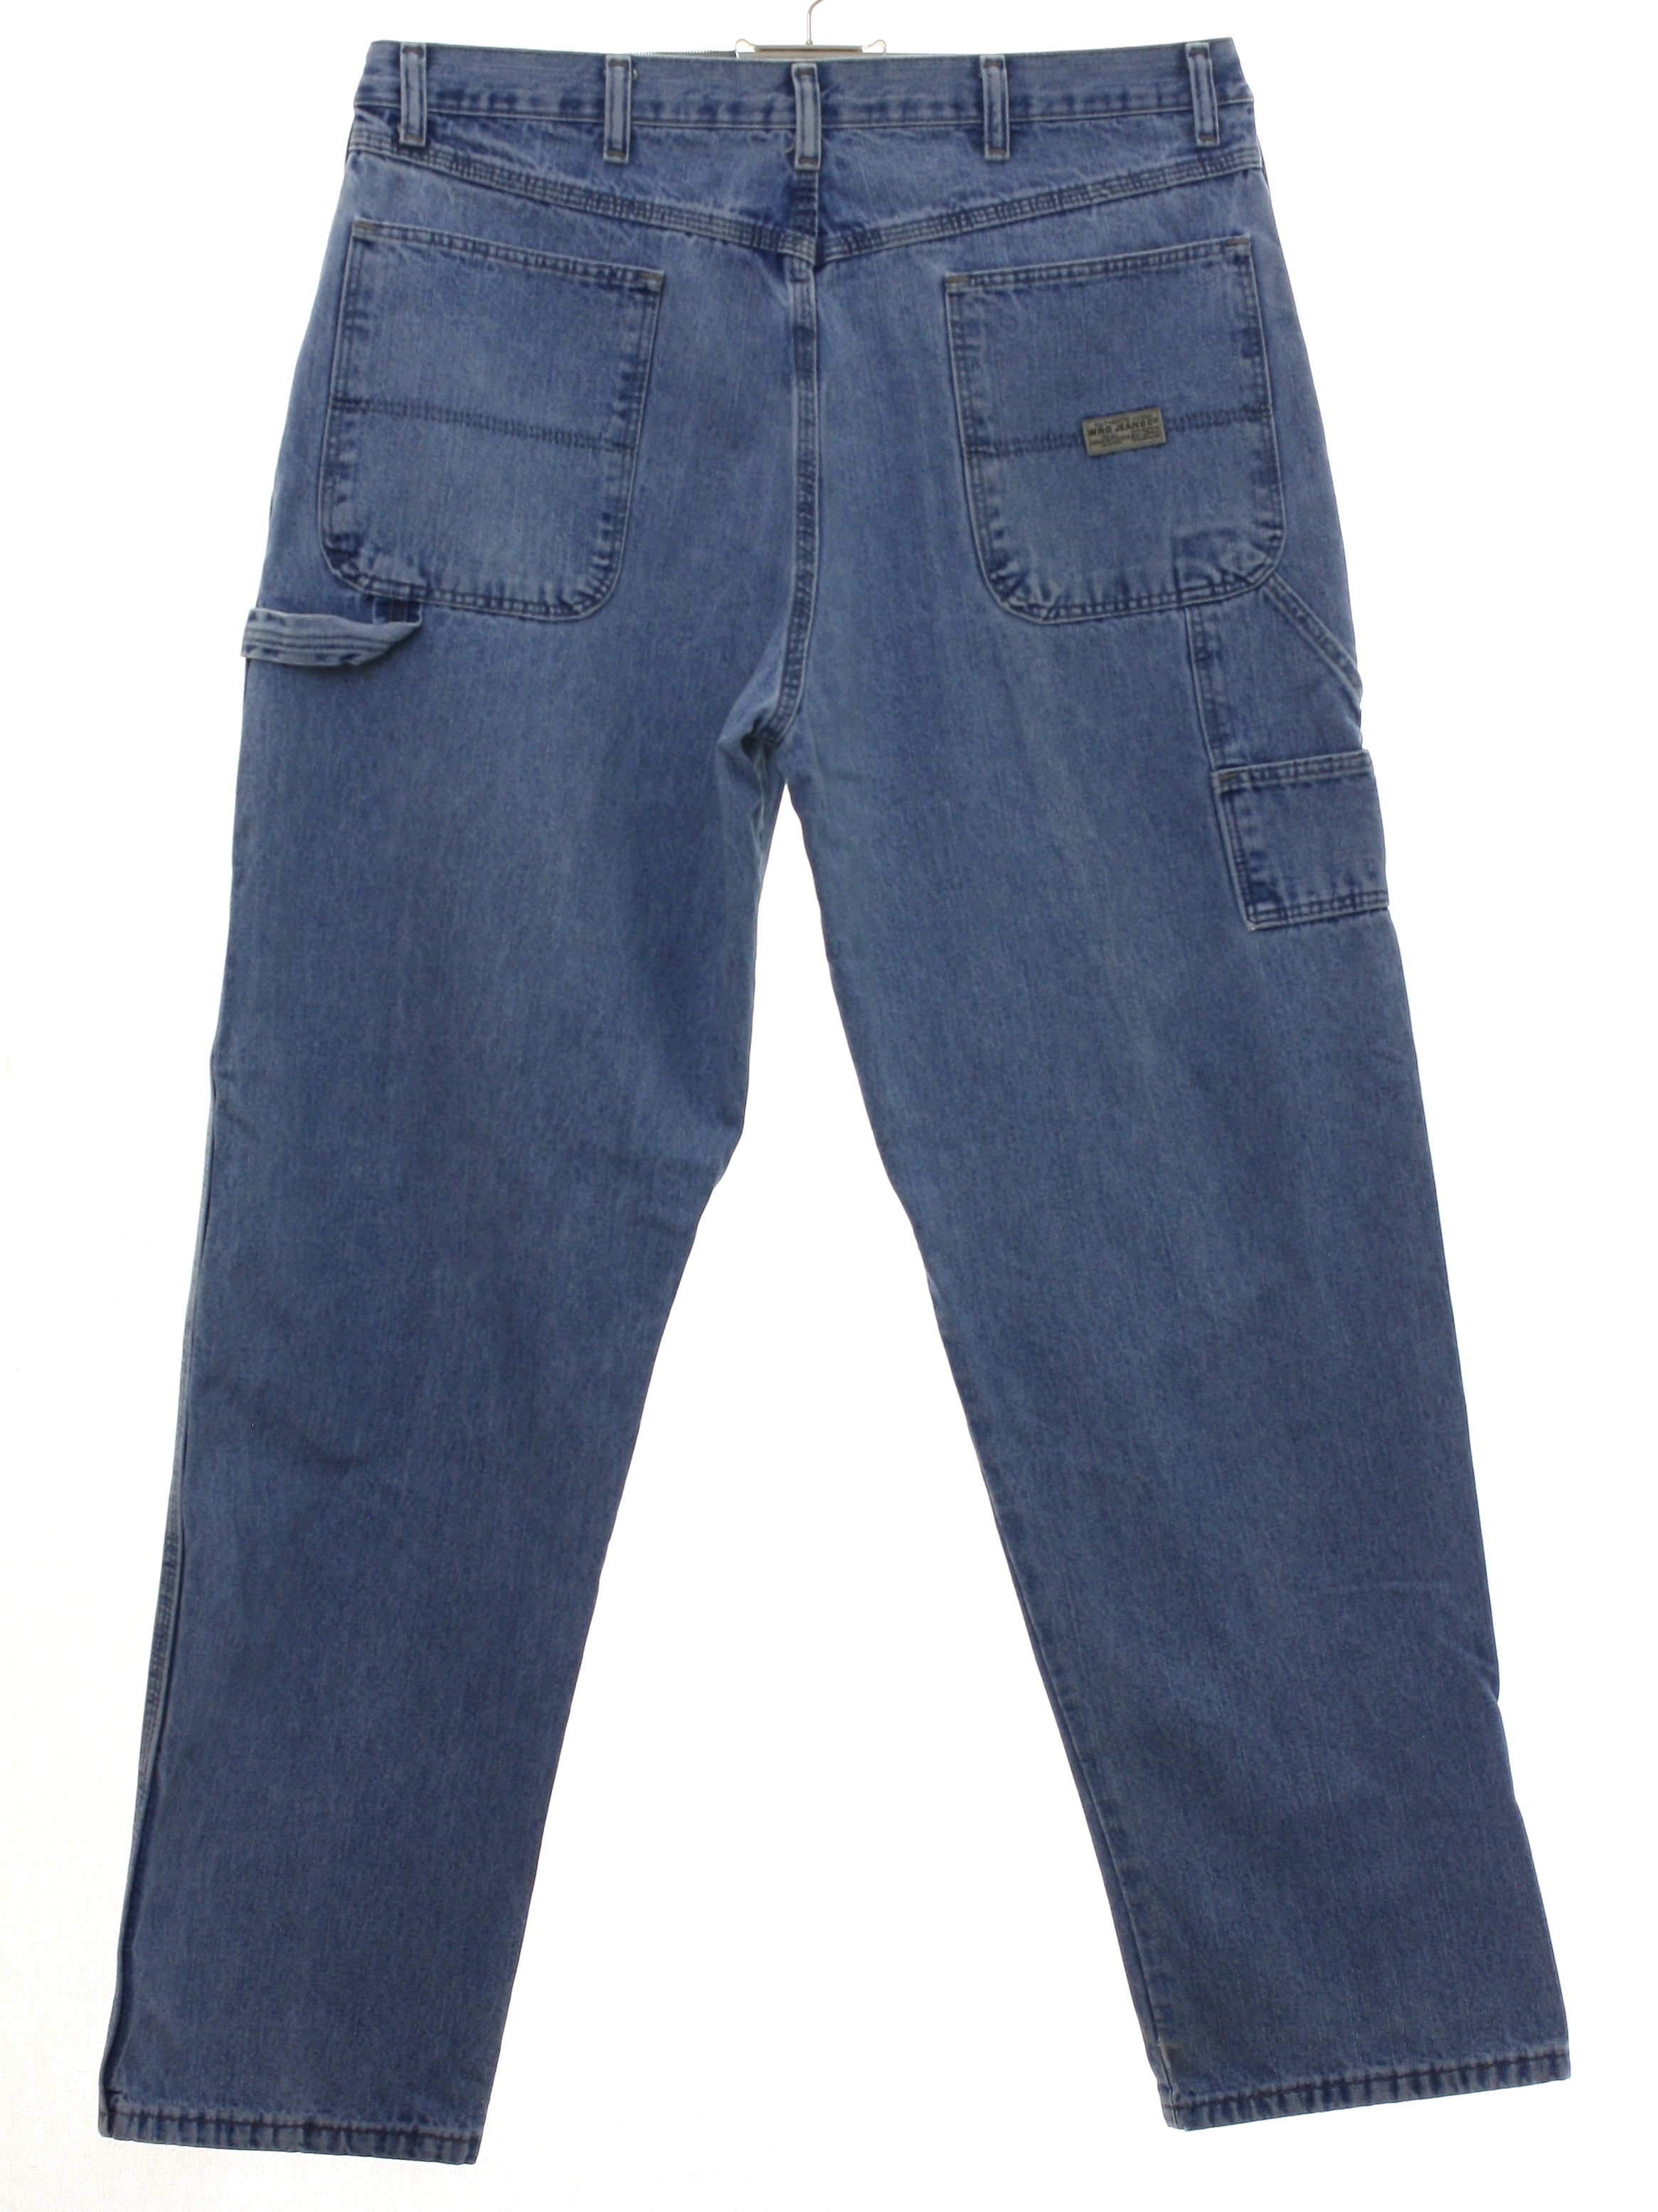 1990's Vintage Authentic Issue WRG Jeans Co. Pants: 90s or newer ...